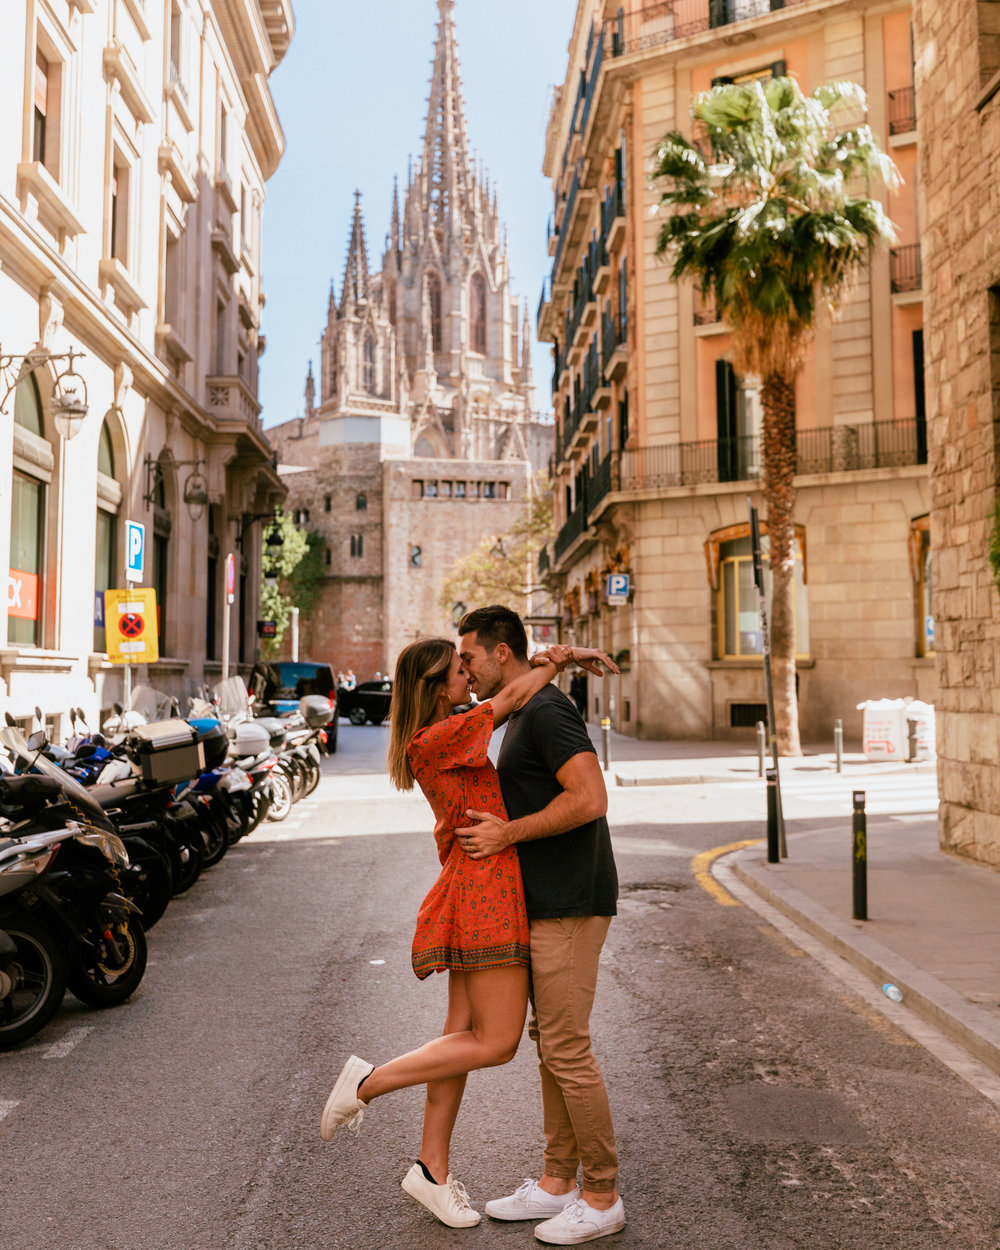 10 Things to do in Barcelona. Our Travel Passport